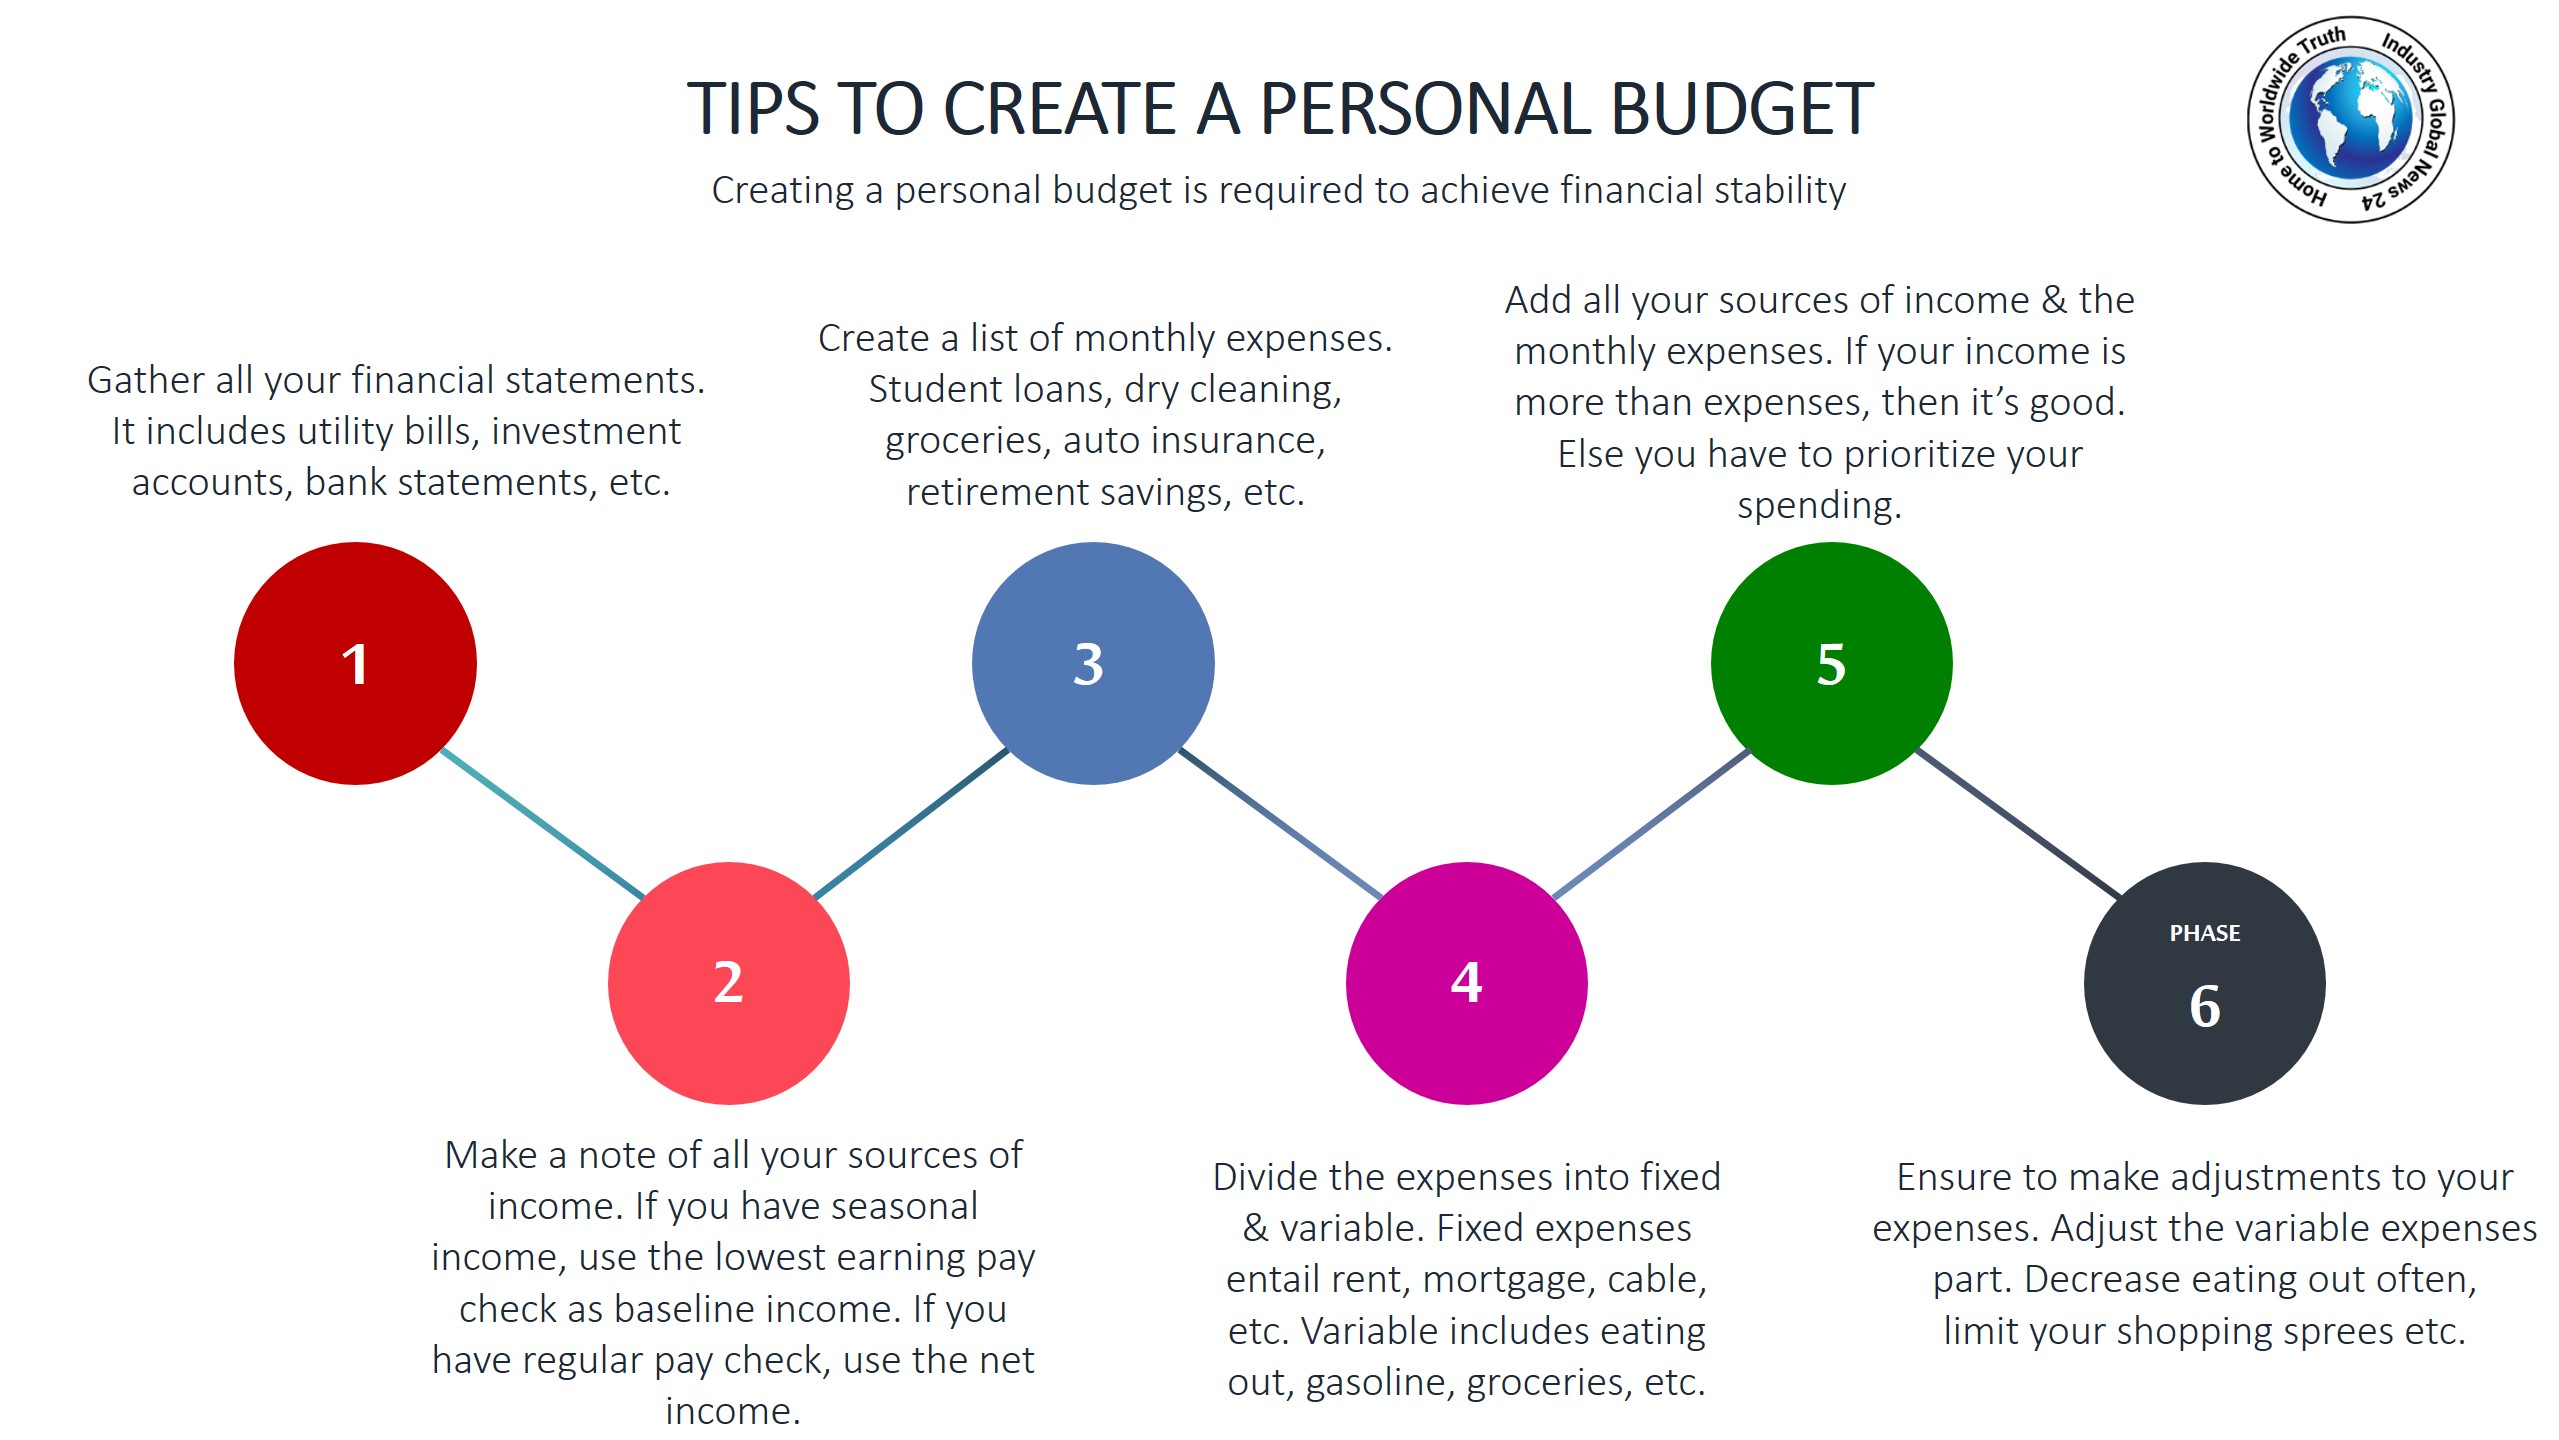 Tips to create a personal budget